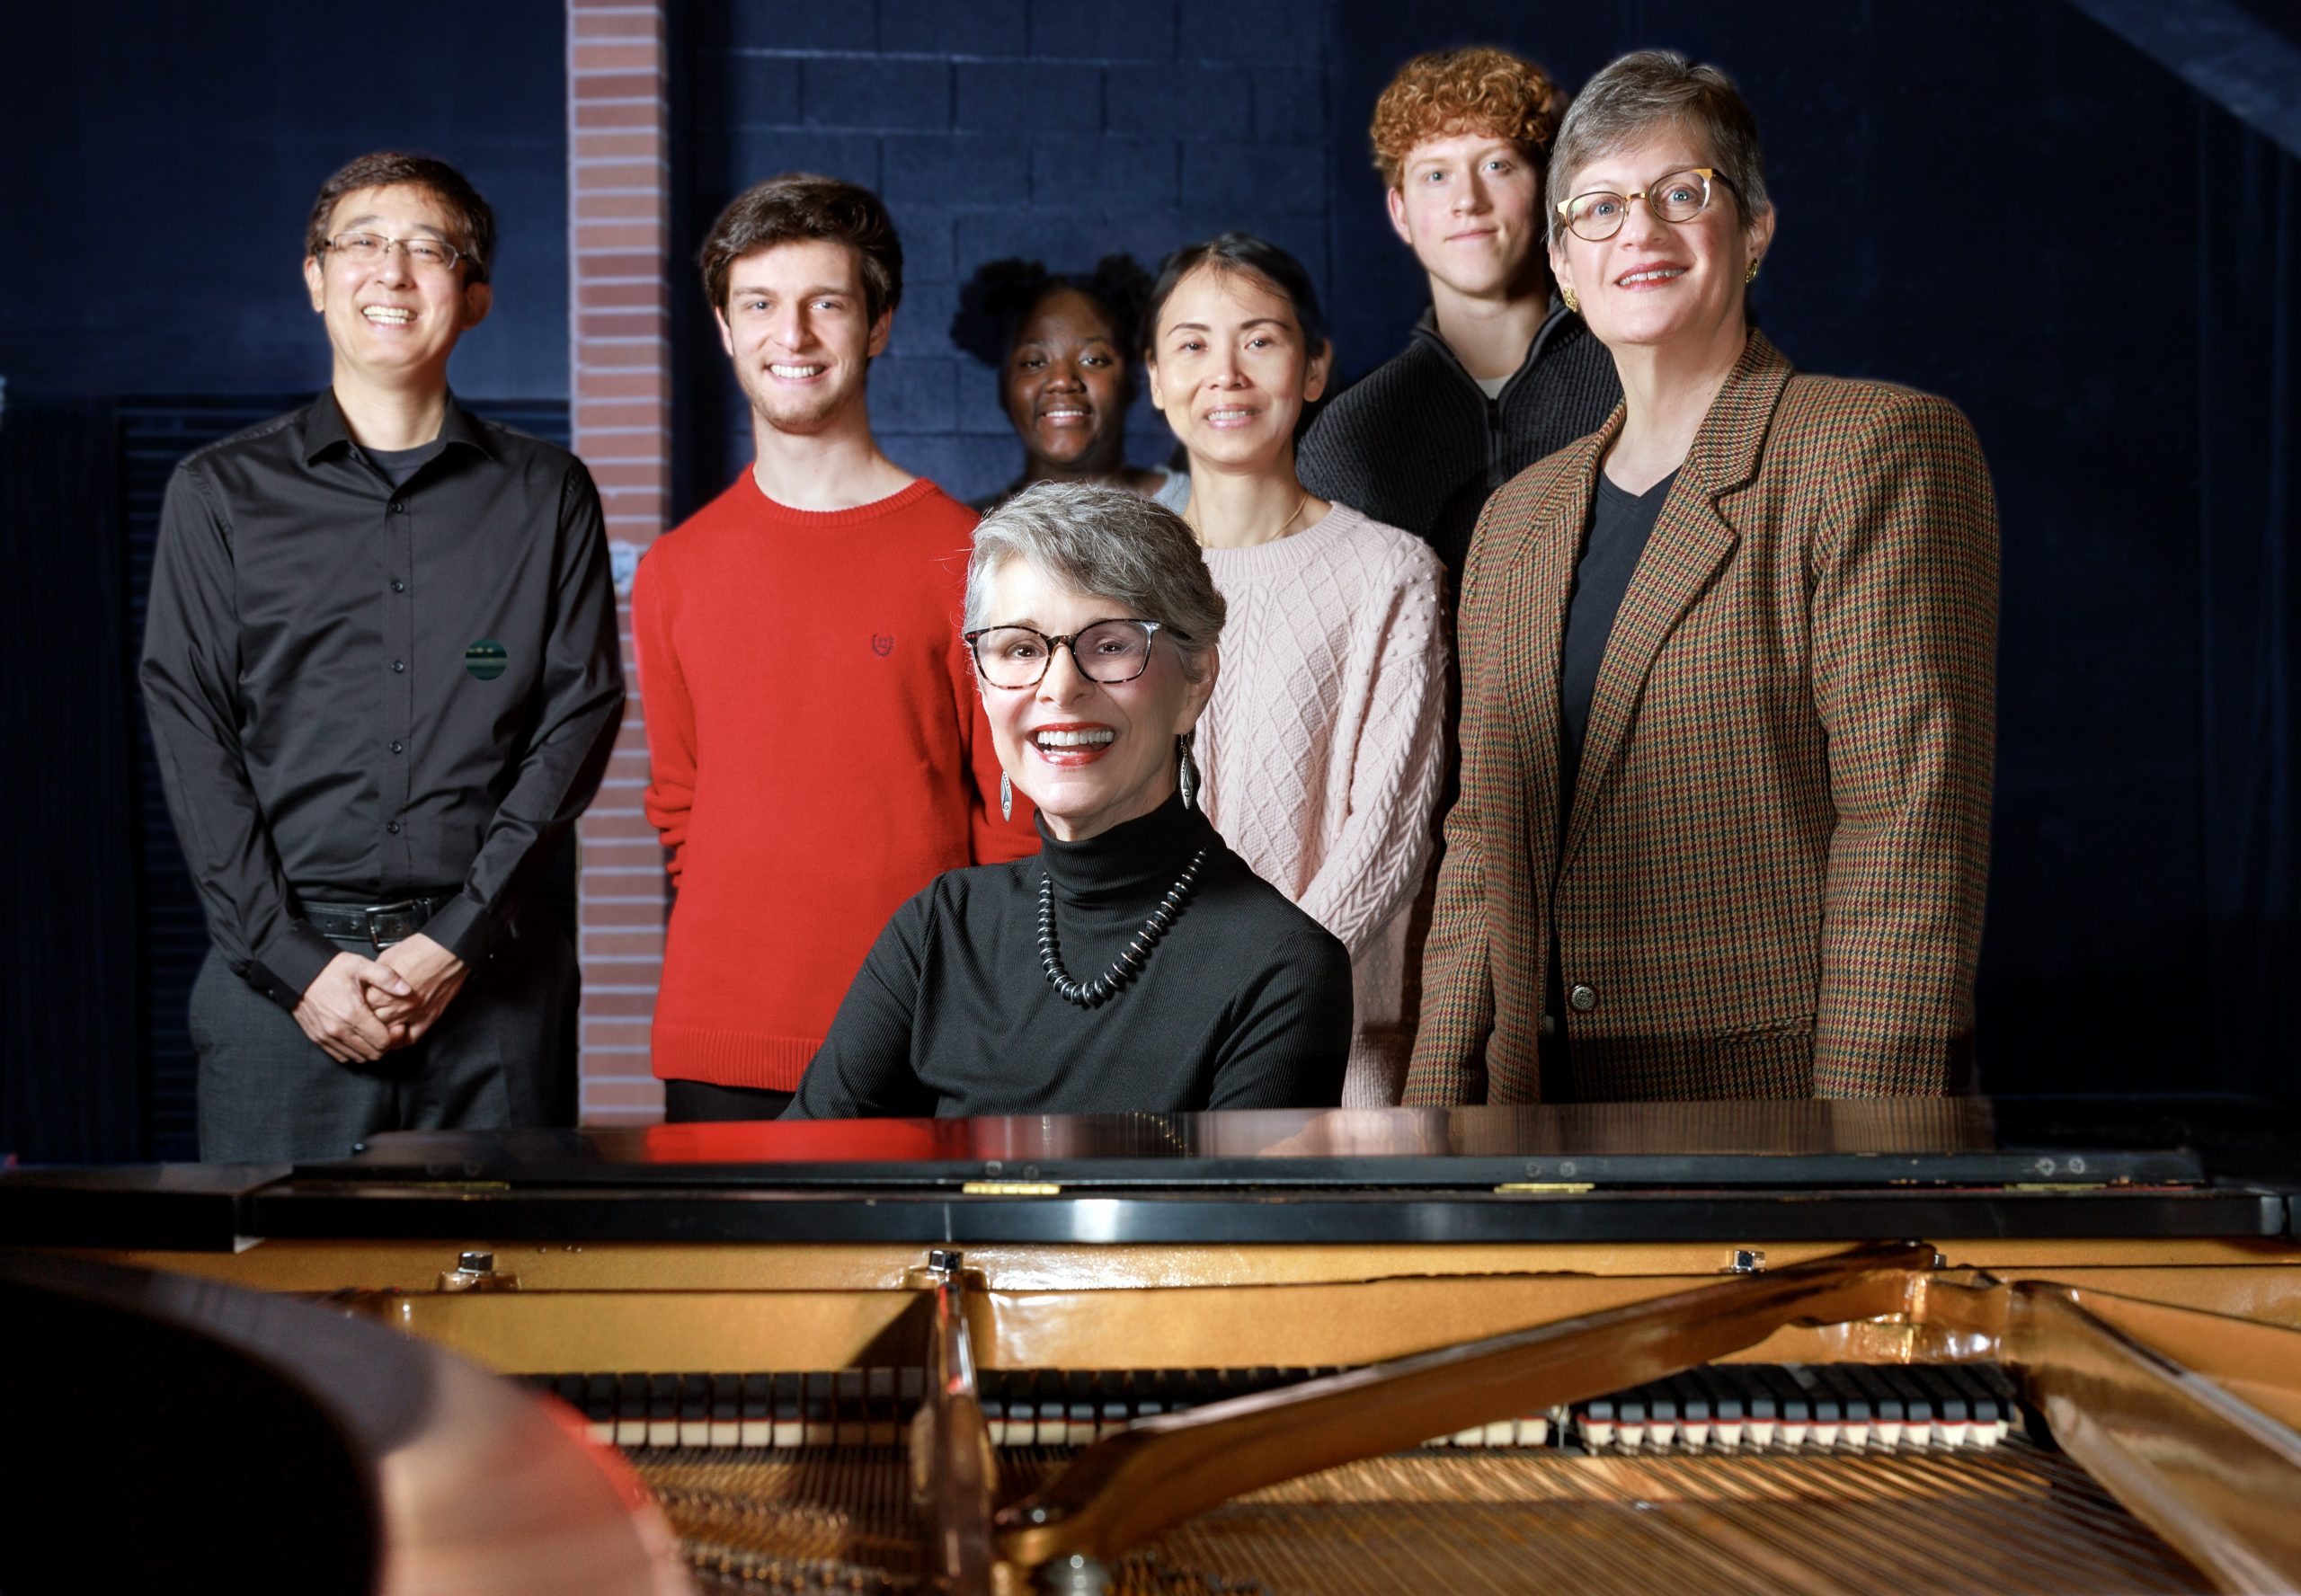 Donor Jeanette Hamilton, center, plays the piano surrounded by UA Little Rock music faculty and students, from left to right, Dr. Naoki Hakutani, Stephen Graham, Nakira Bates, Rachel Tsai Ashton Blankenship, and Dr. Linda Holzer. Photo by Ben Krain.